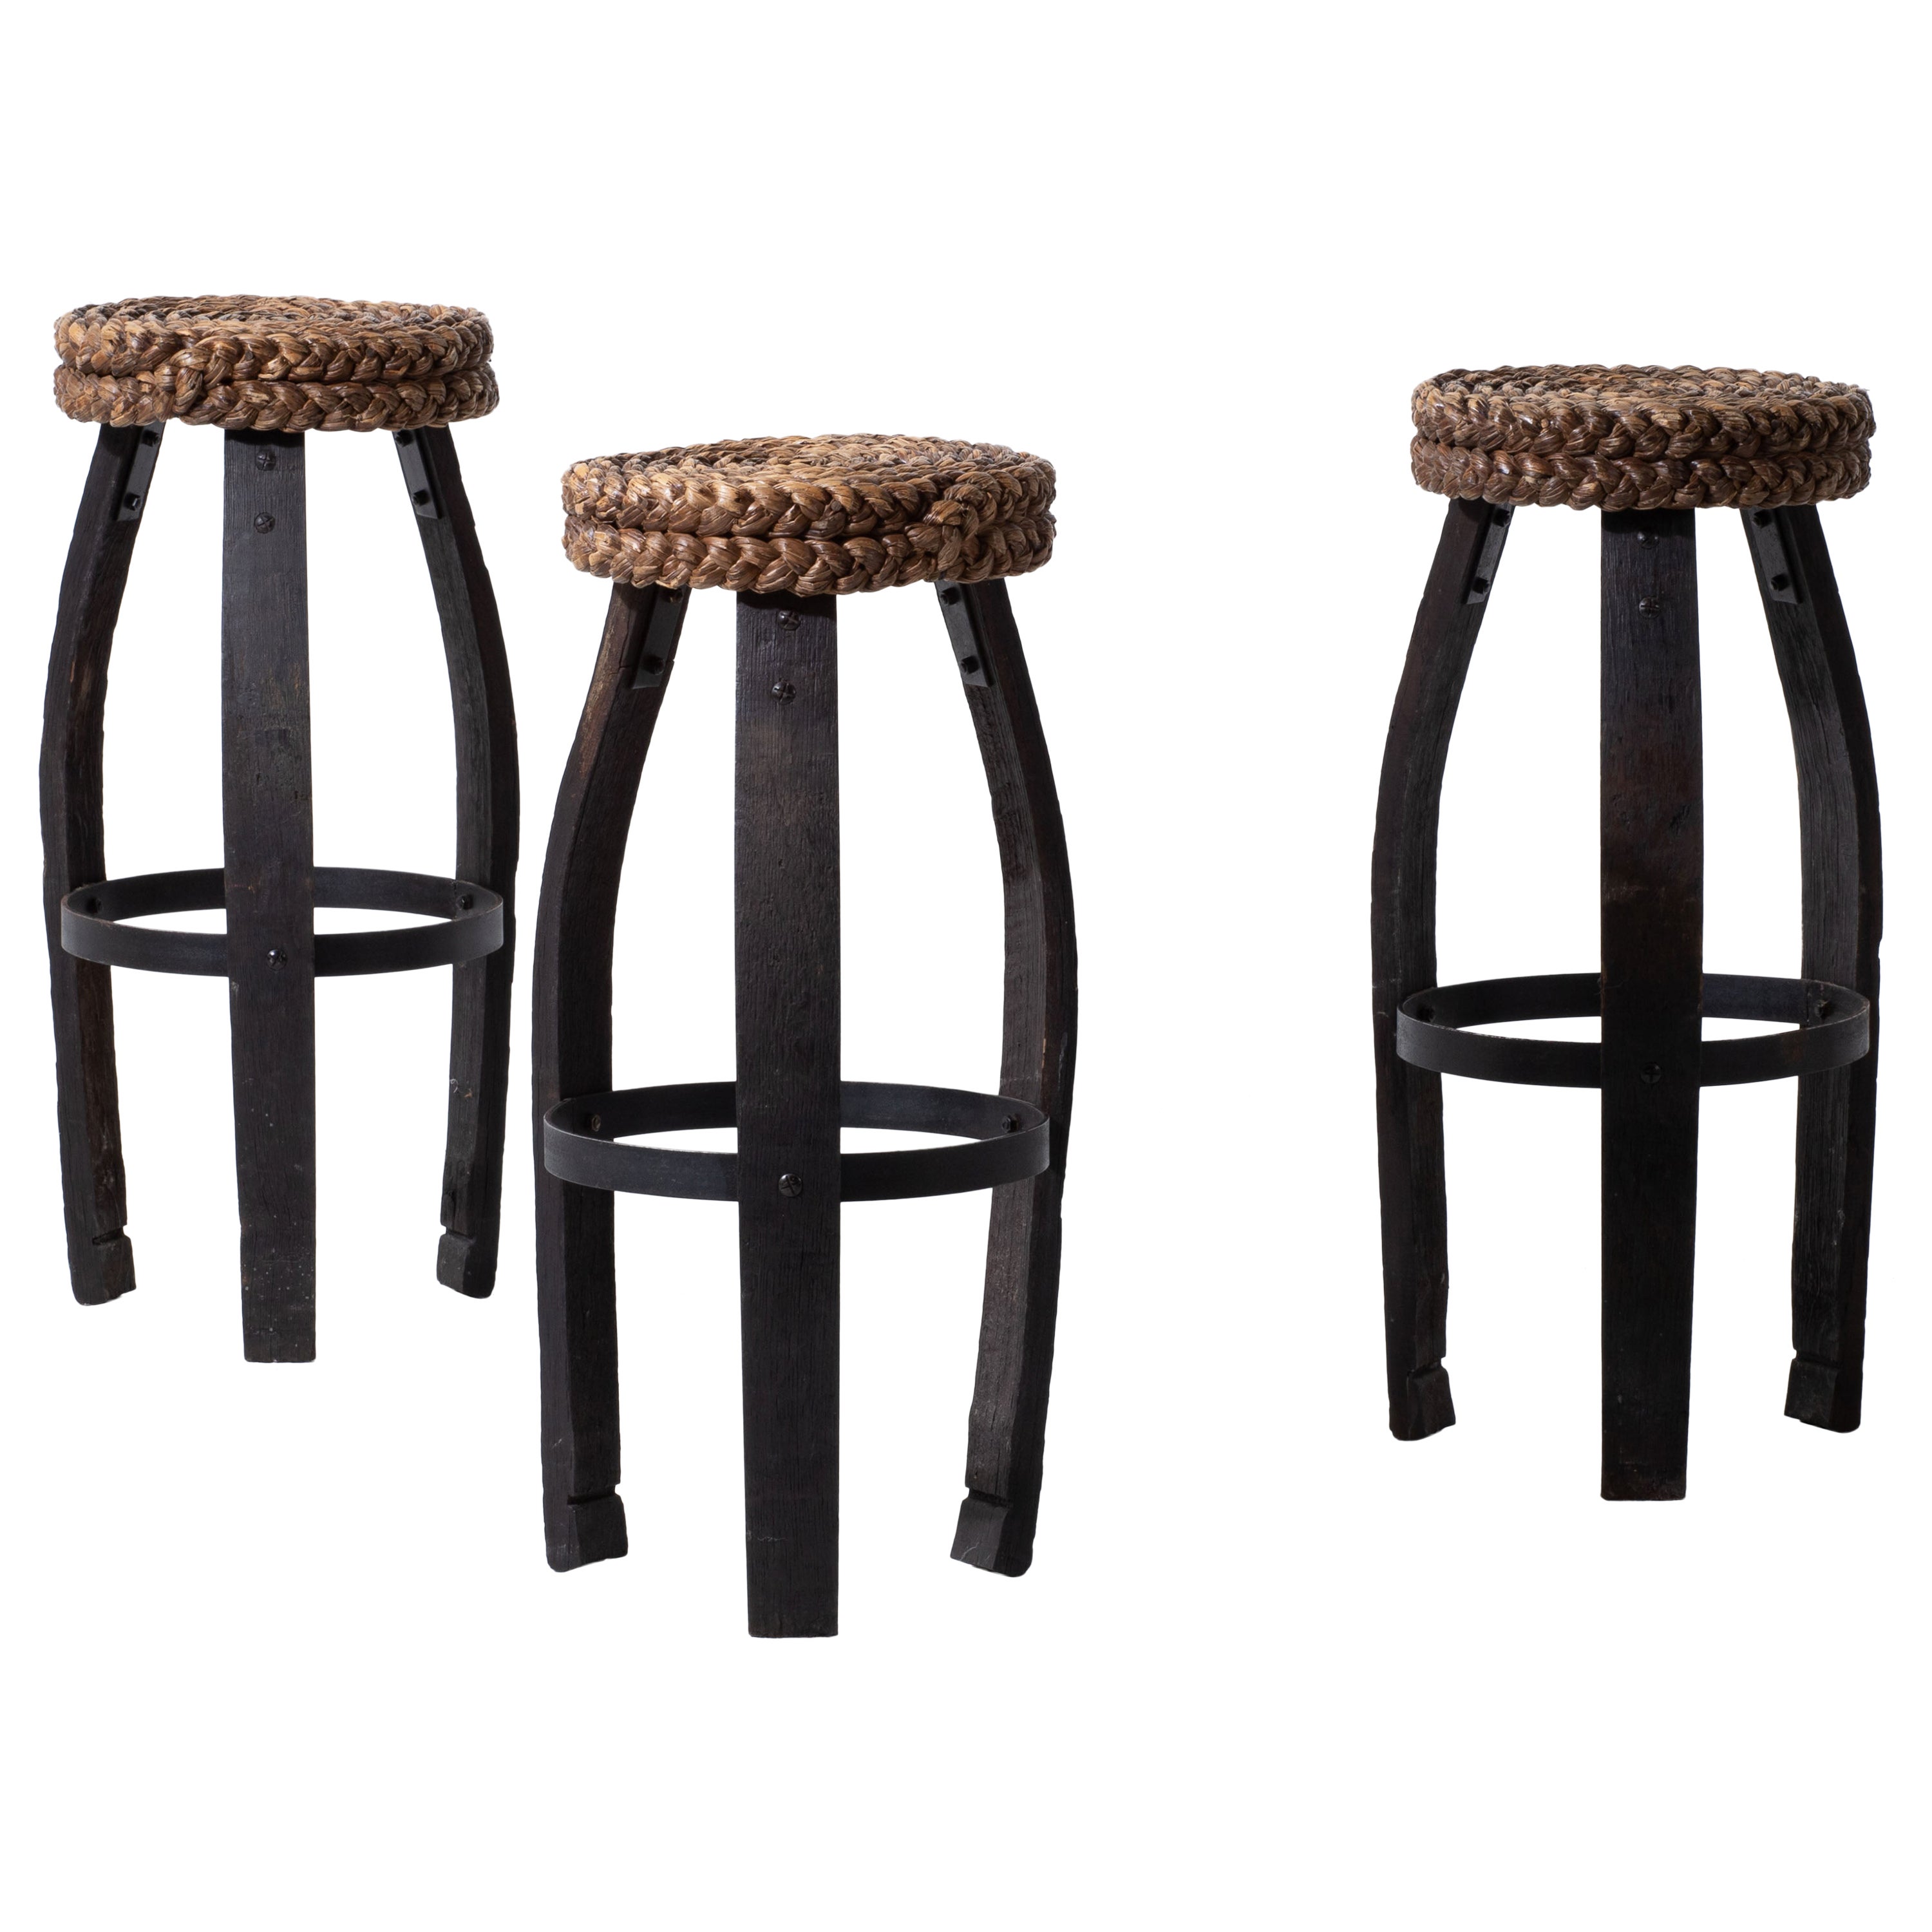 French Stool by Adrien Audoux & Frida Minet, 1950s For Sale